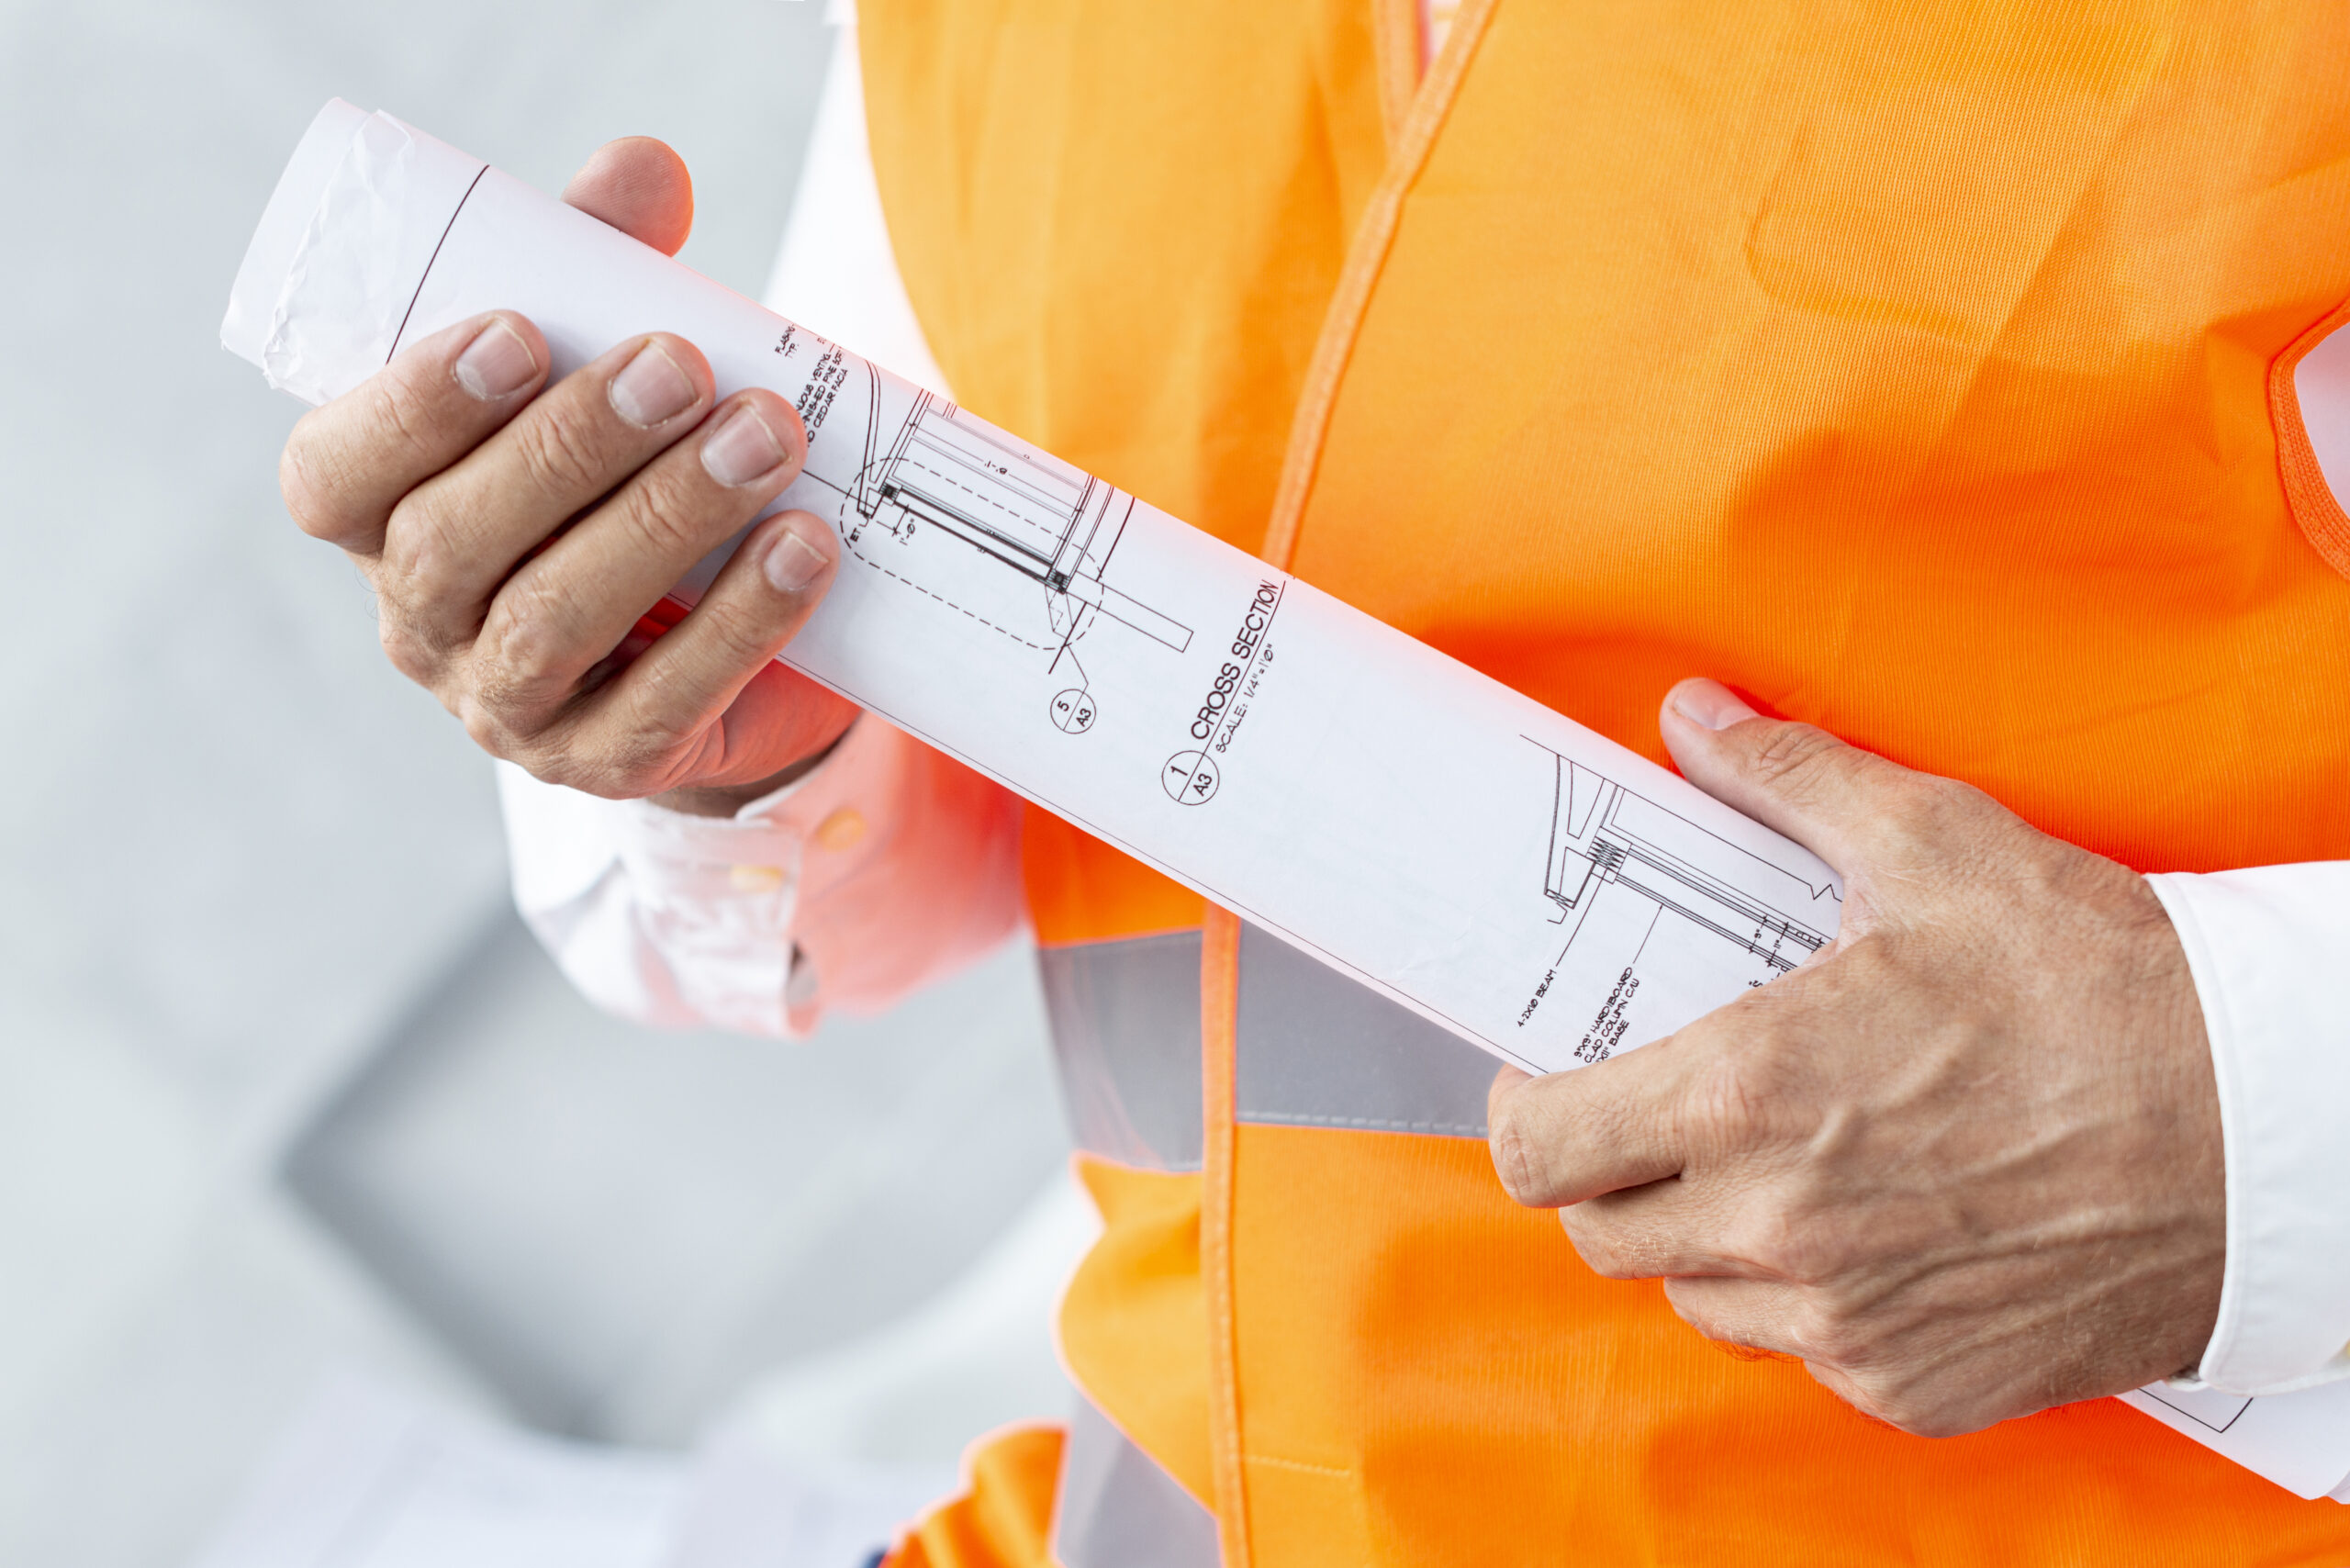 Certified Construction Safety Manager (CCSM)